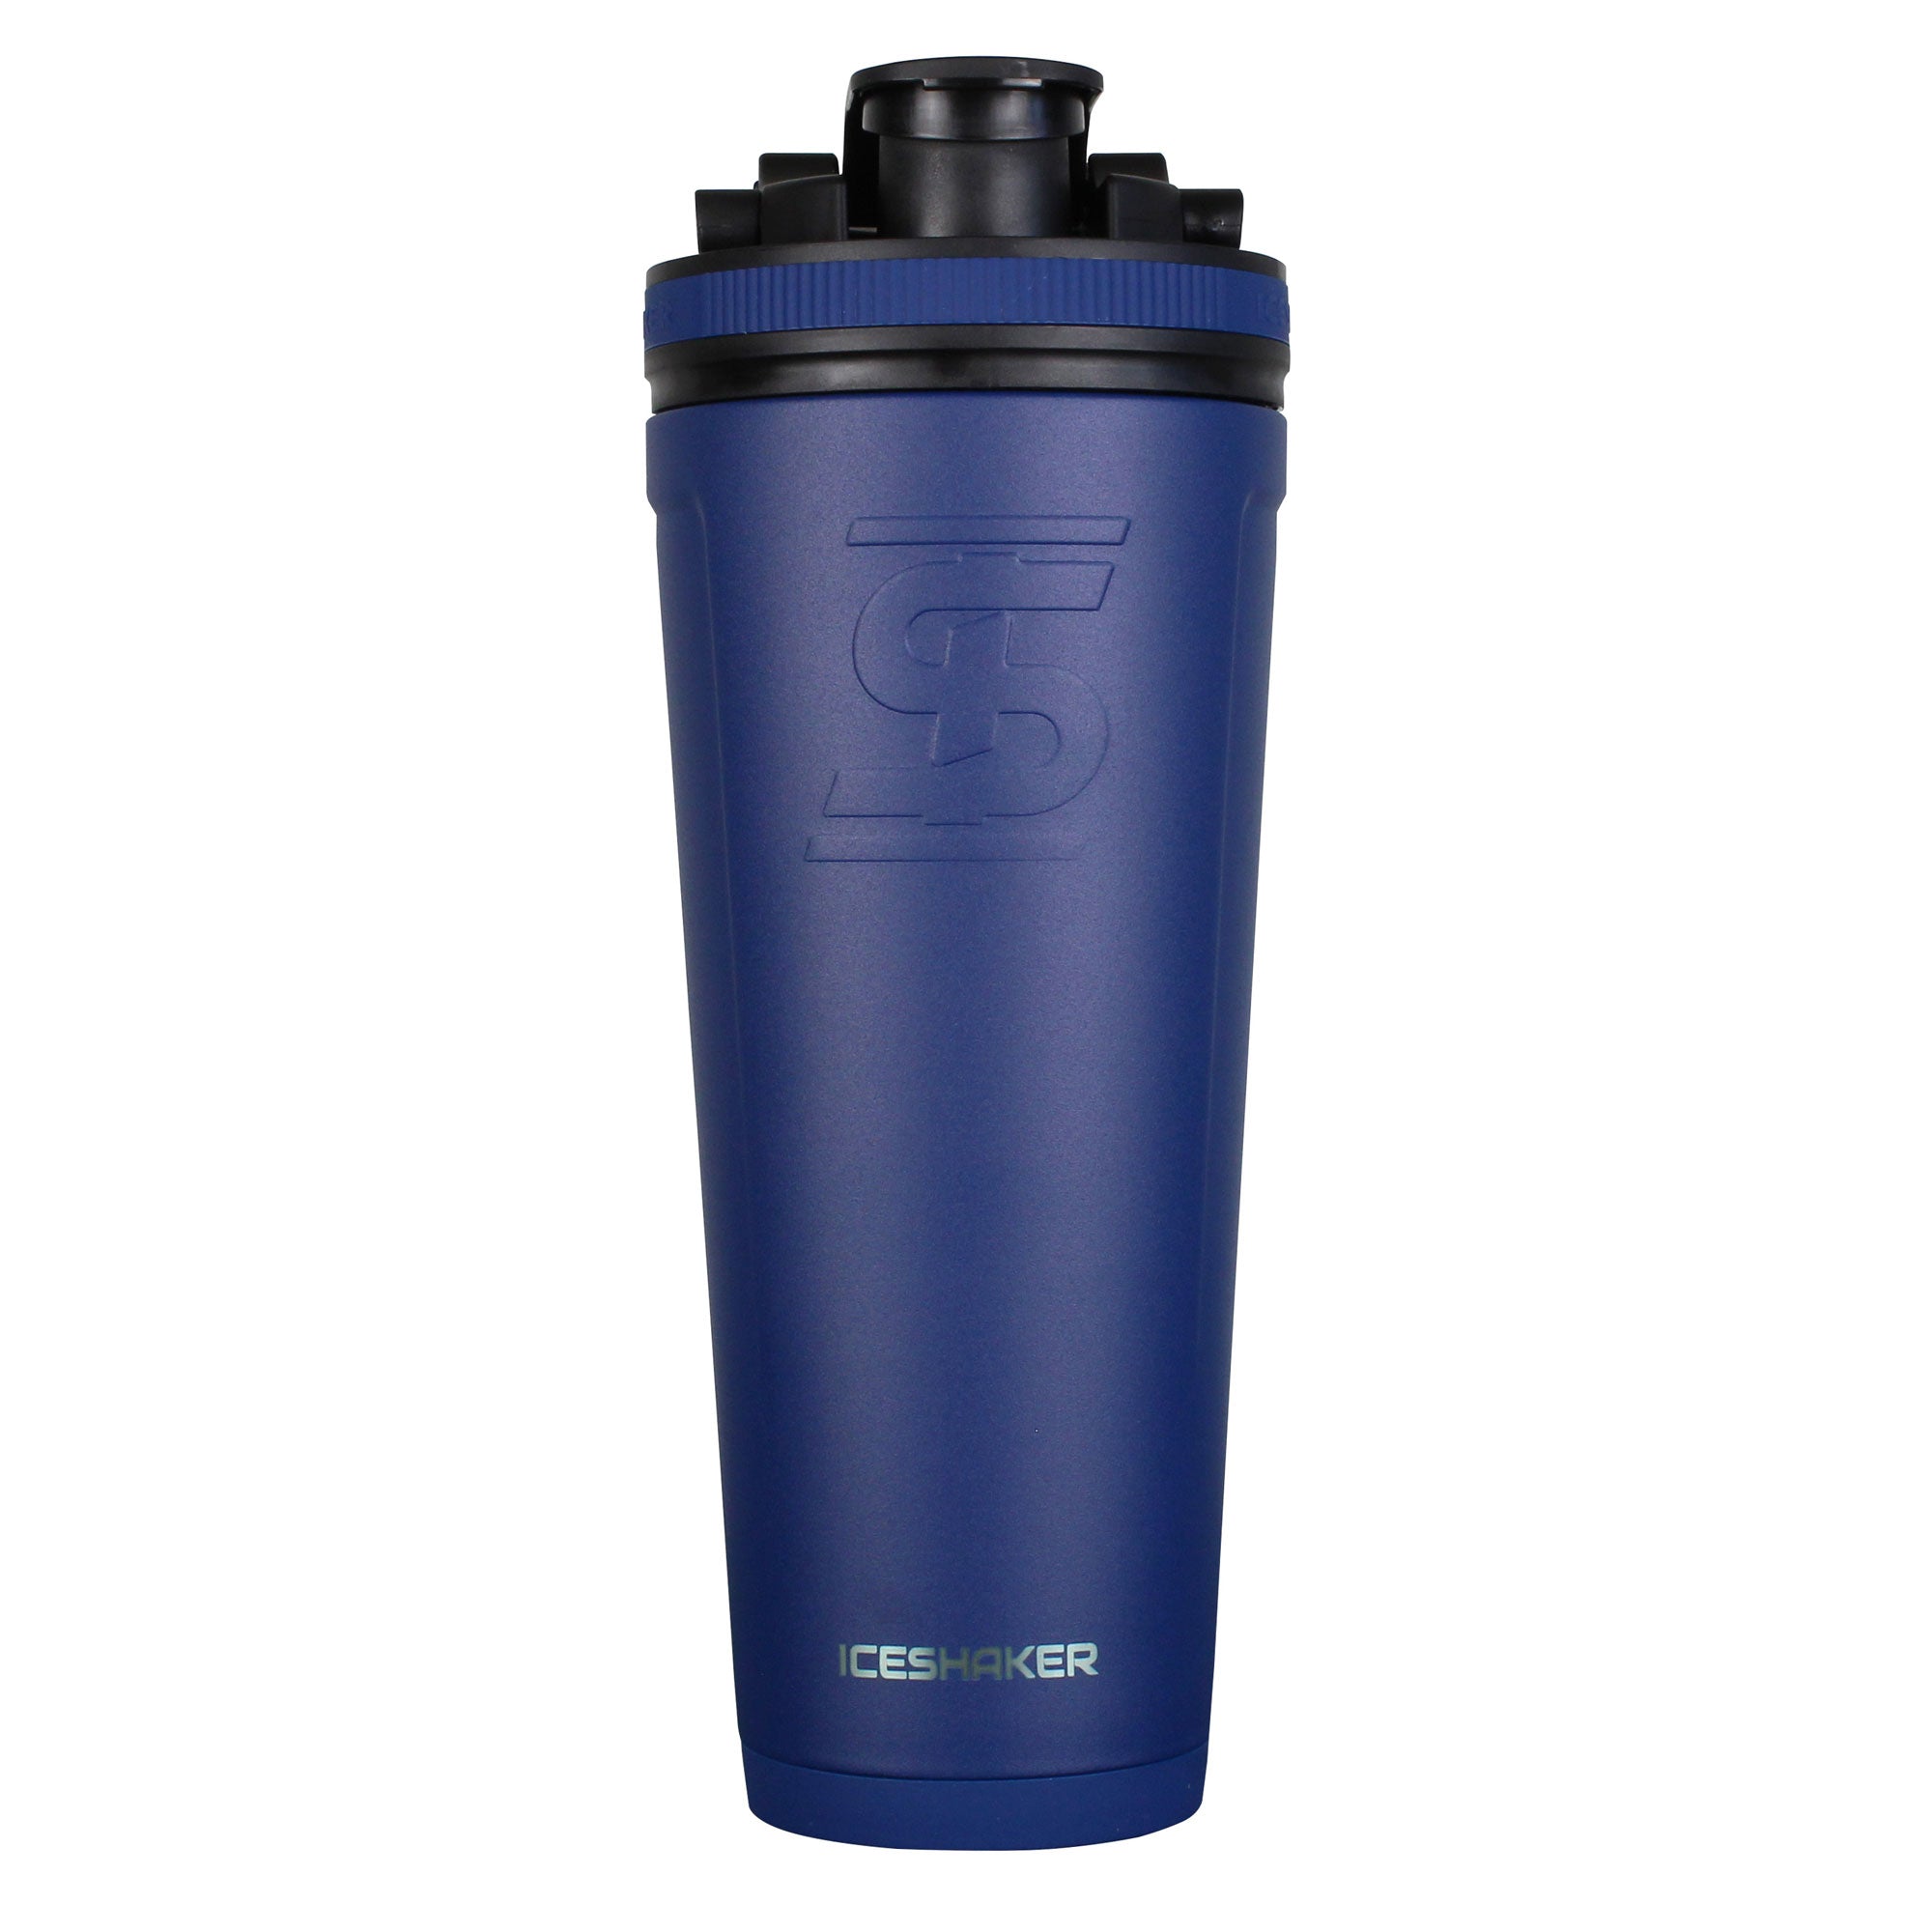 Gifts for Her: NEW Summer Escape 36oz Protein Shaker Bottle